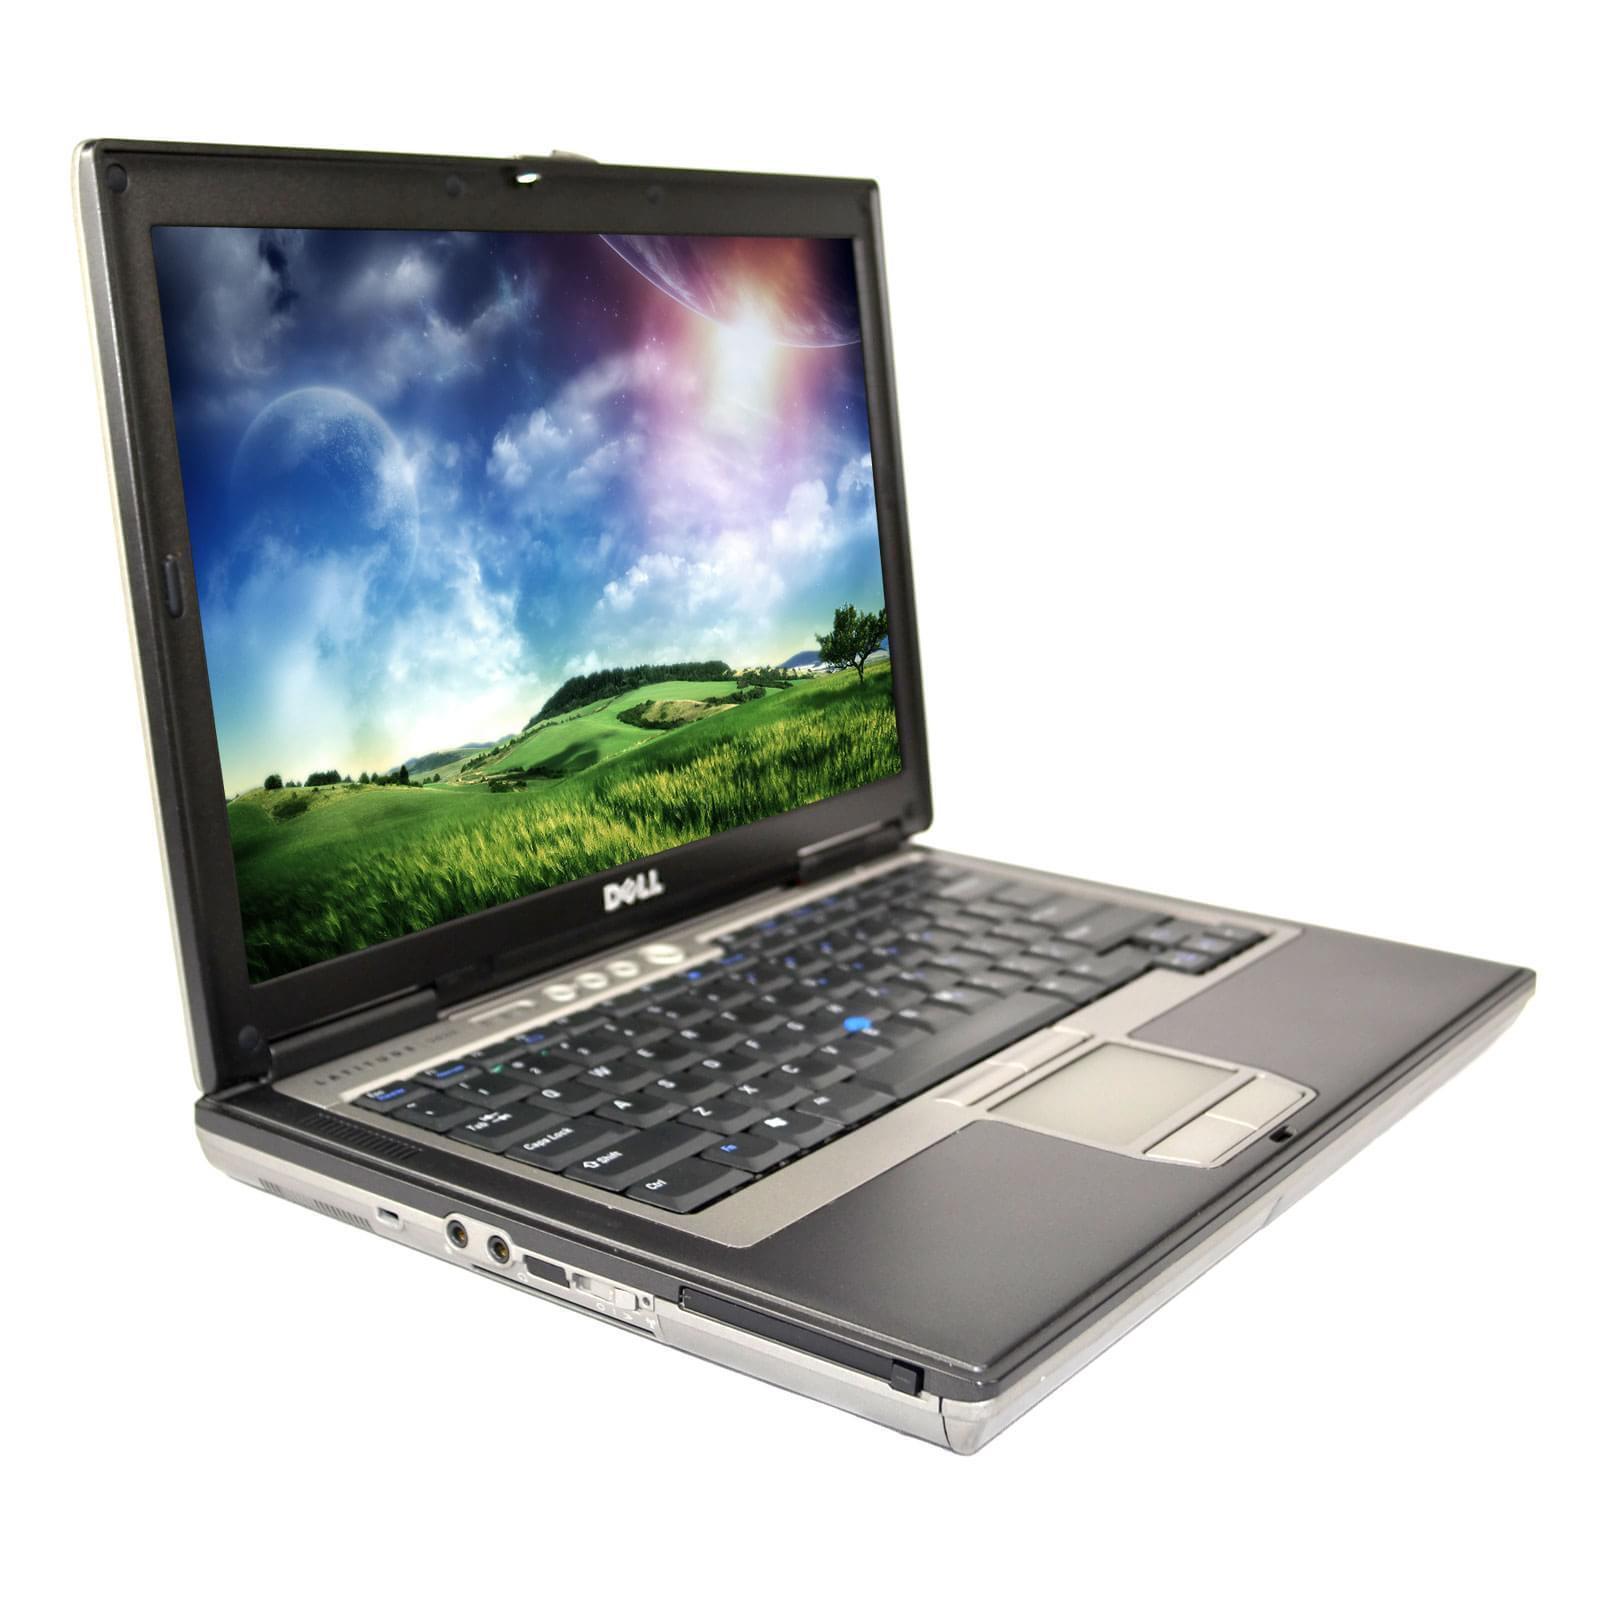 DELL Latitude Laptop Wifi,Win 7 DVD WiFi .word,excel,pwr.point , nice and clean